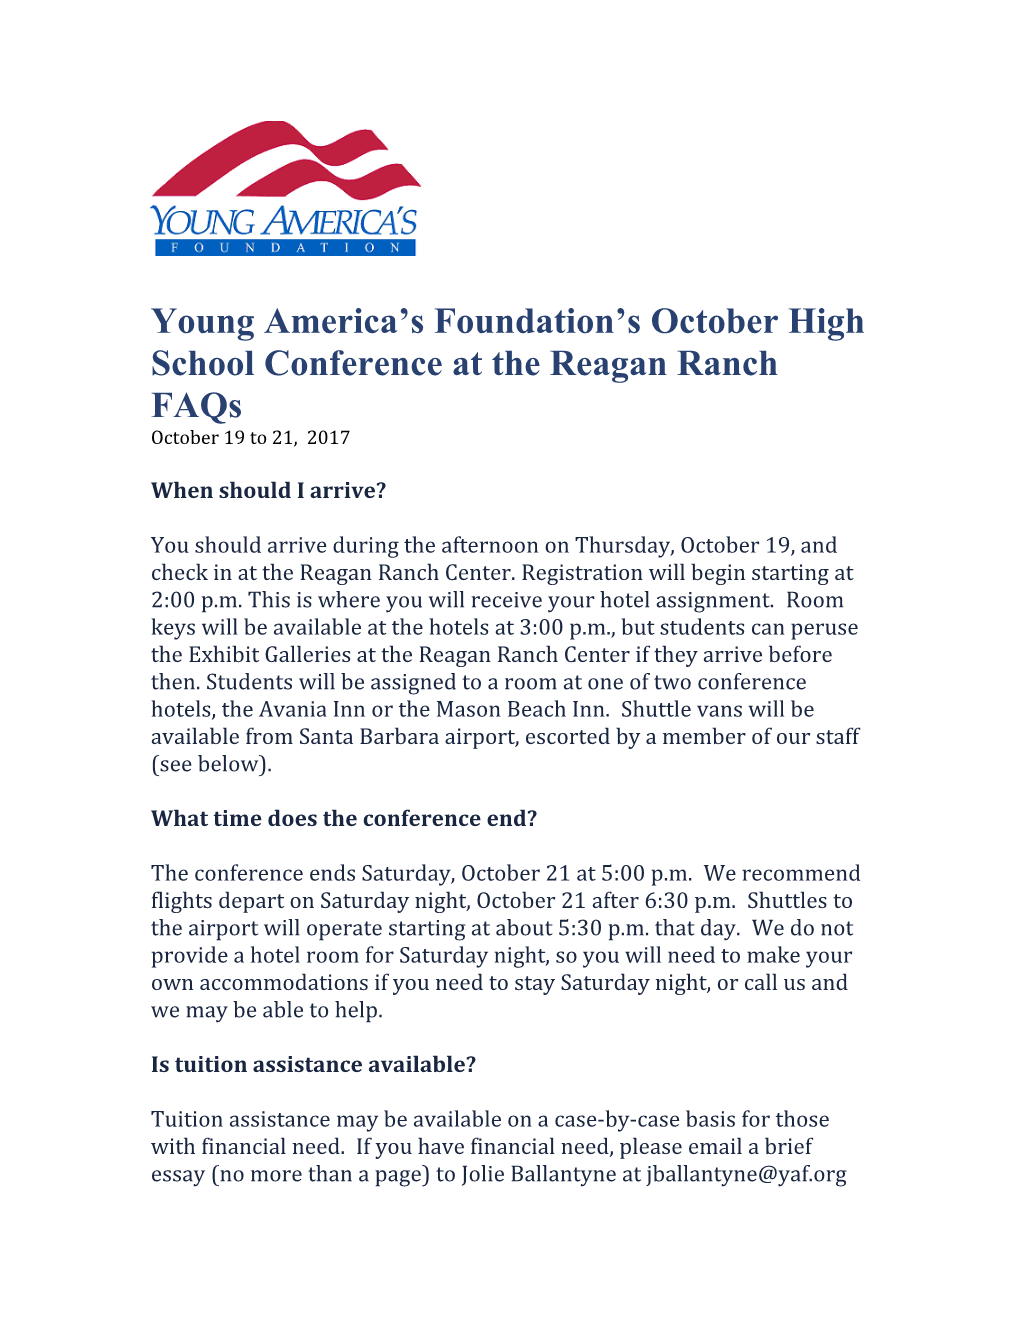 Young America S Foundation S Octoberhigh School Conference at the Reagan Ranch Faqs